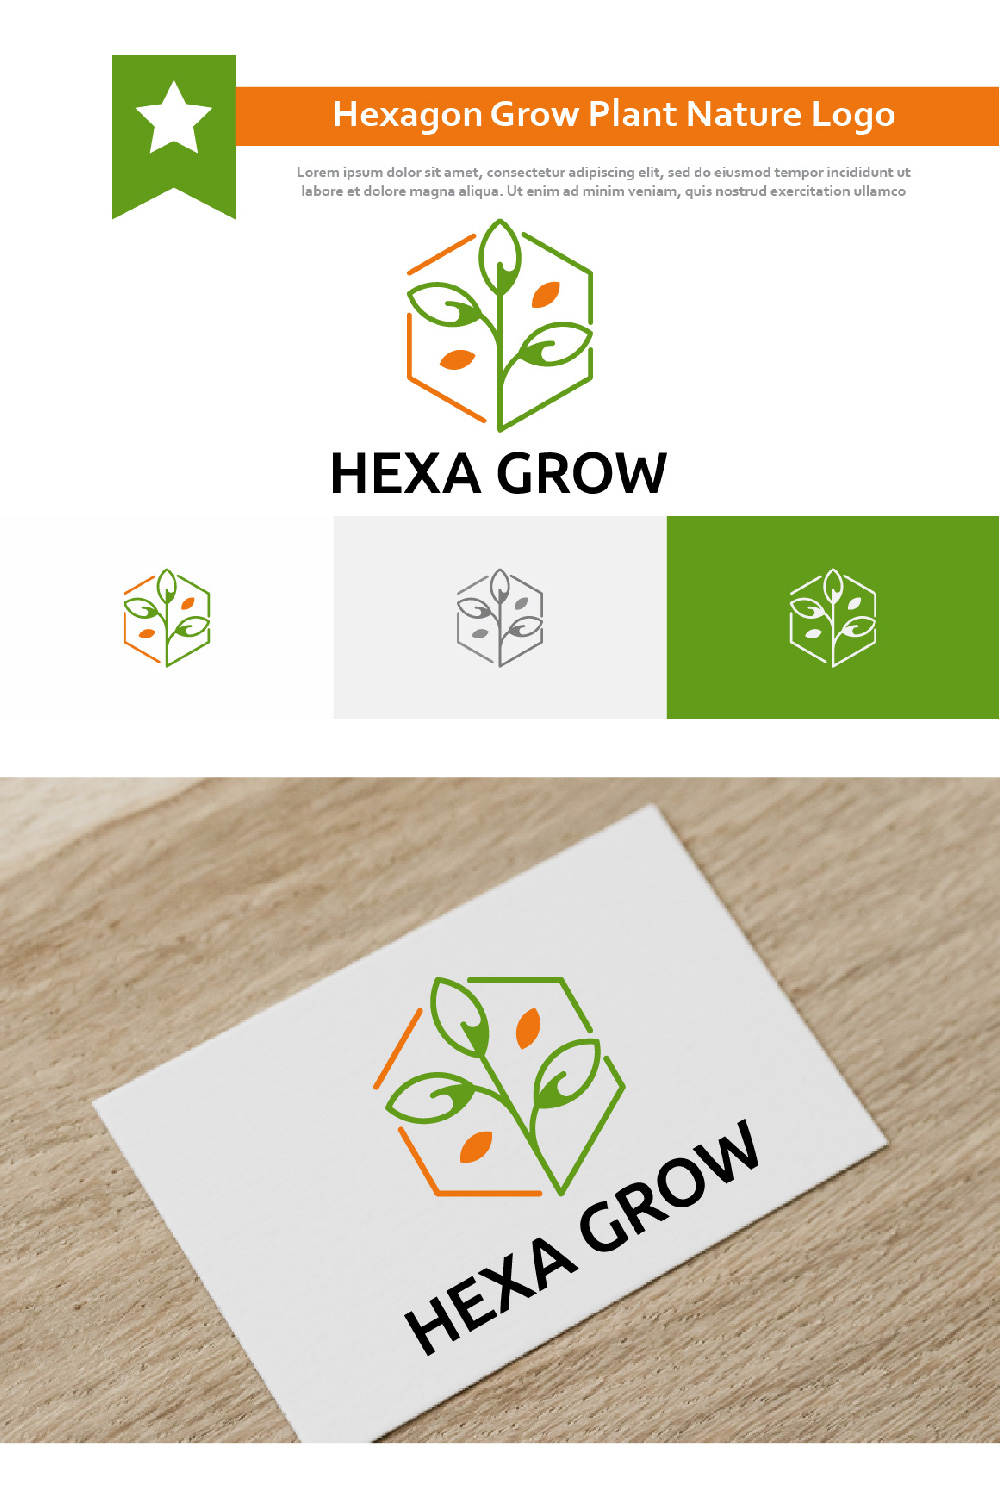 Green plan in hexagon for your logo.